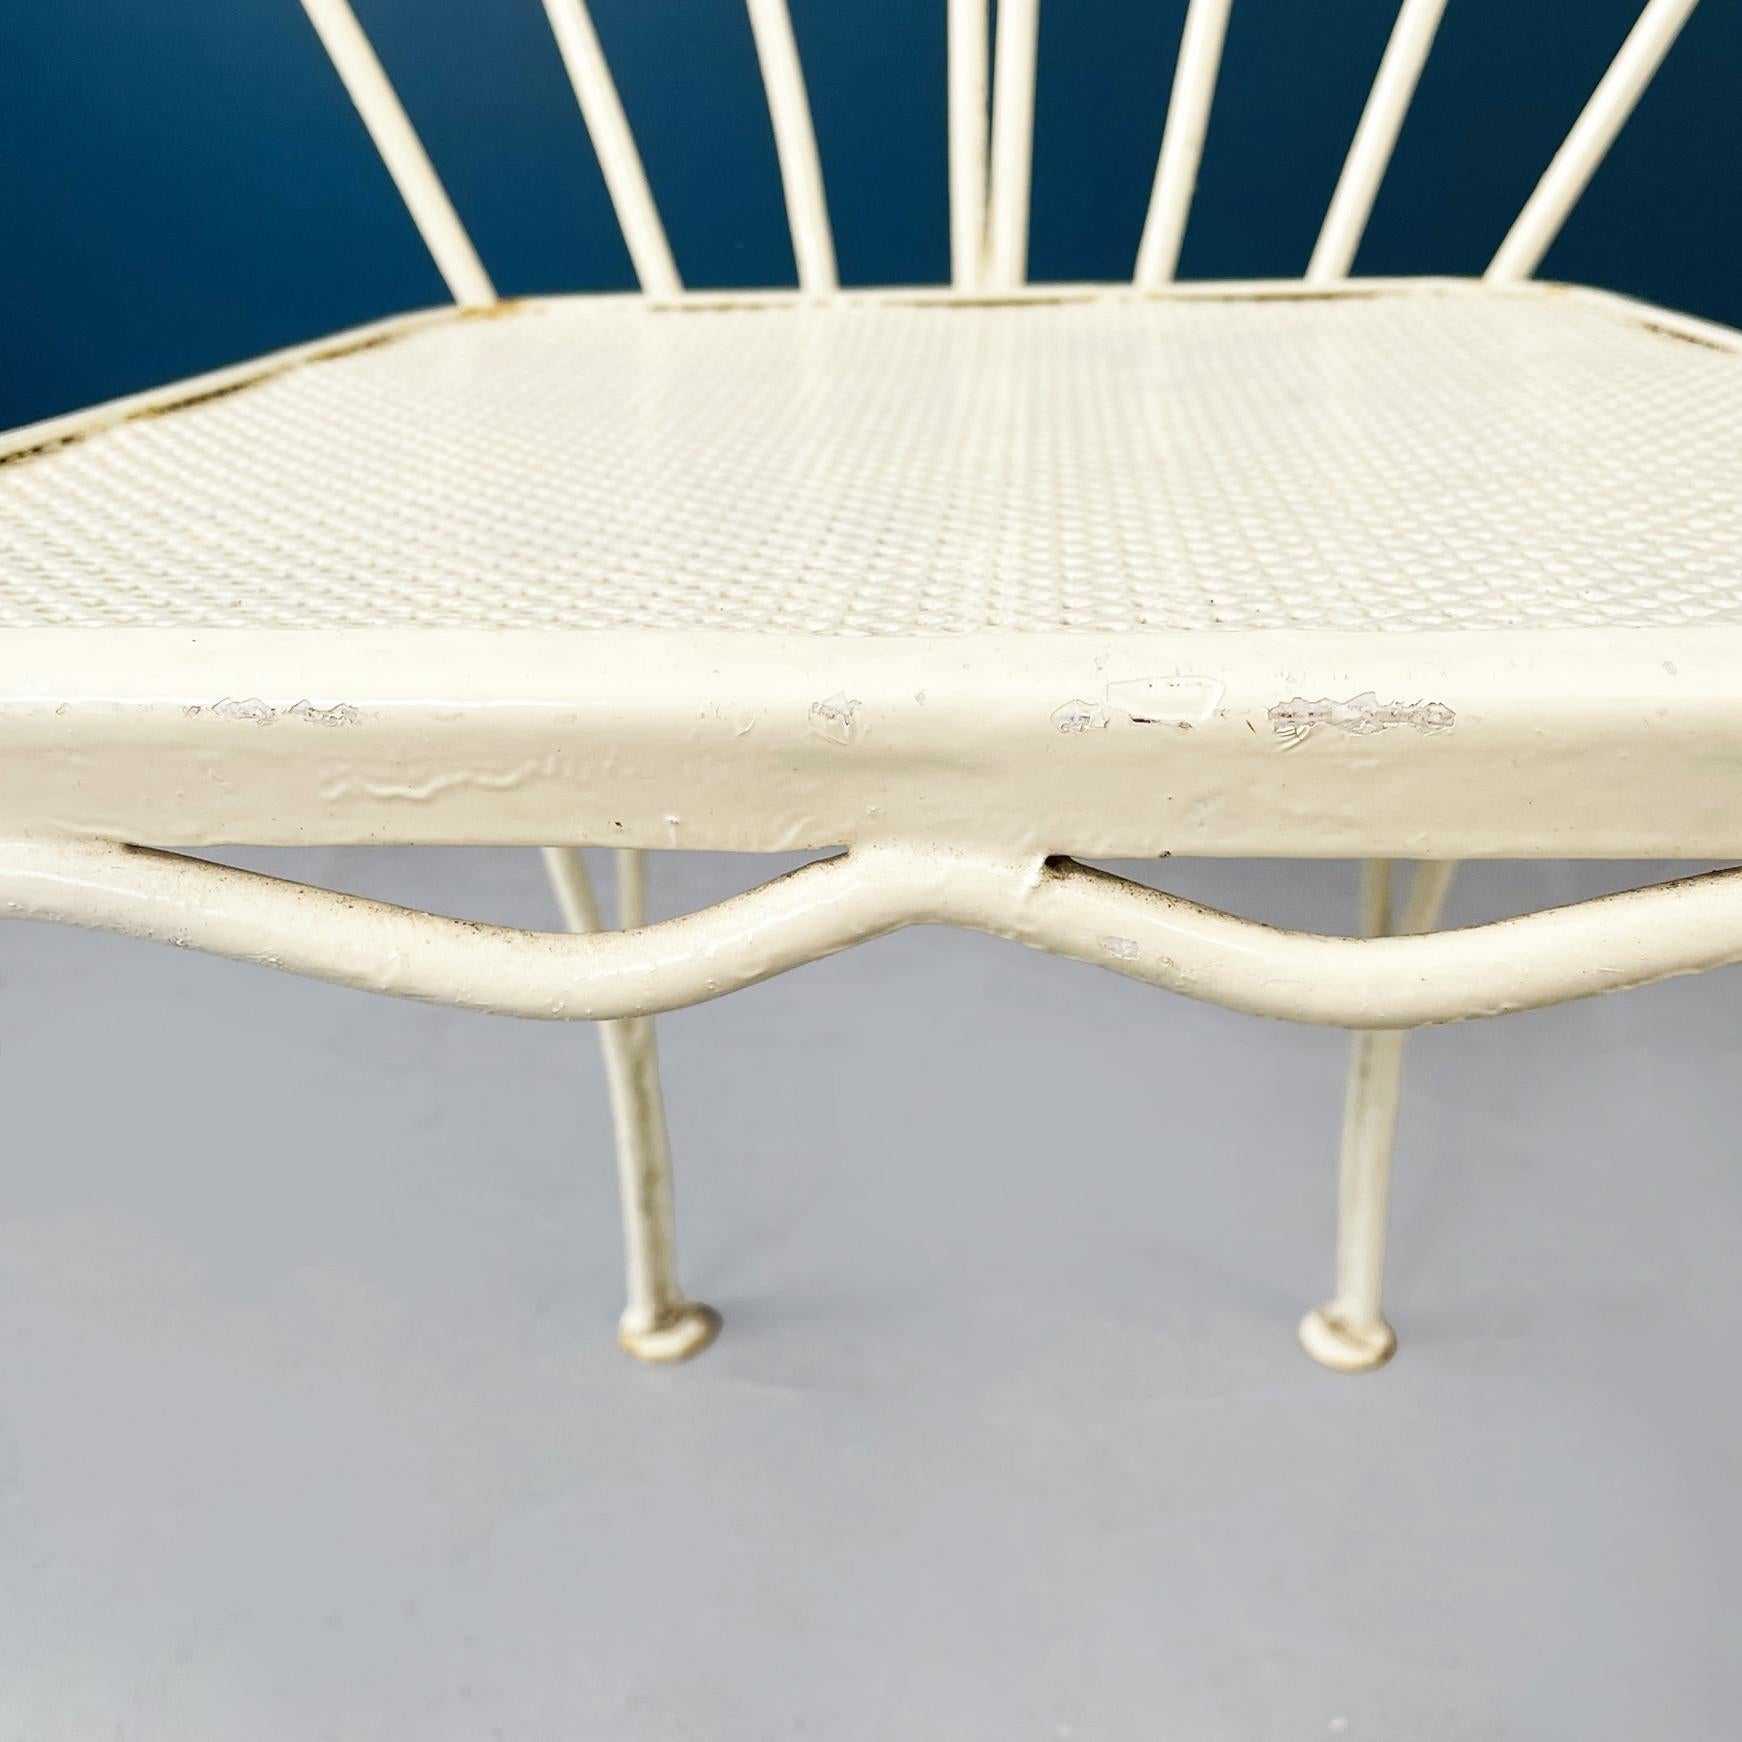 Italian Mid-Century Modern Garden Chairs and Table in White Wrought Iron, 1960s For Sale 3